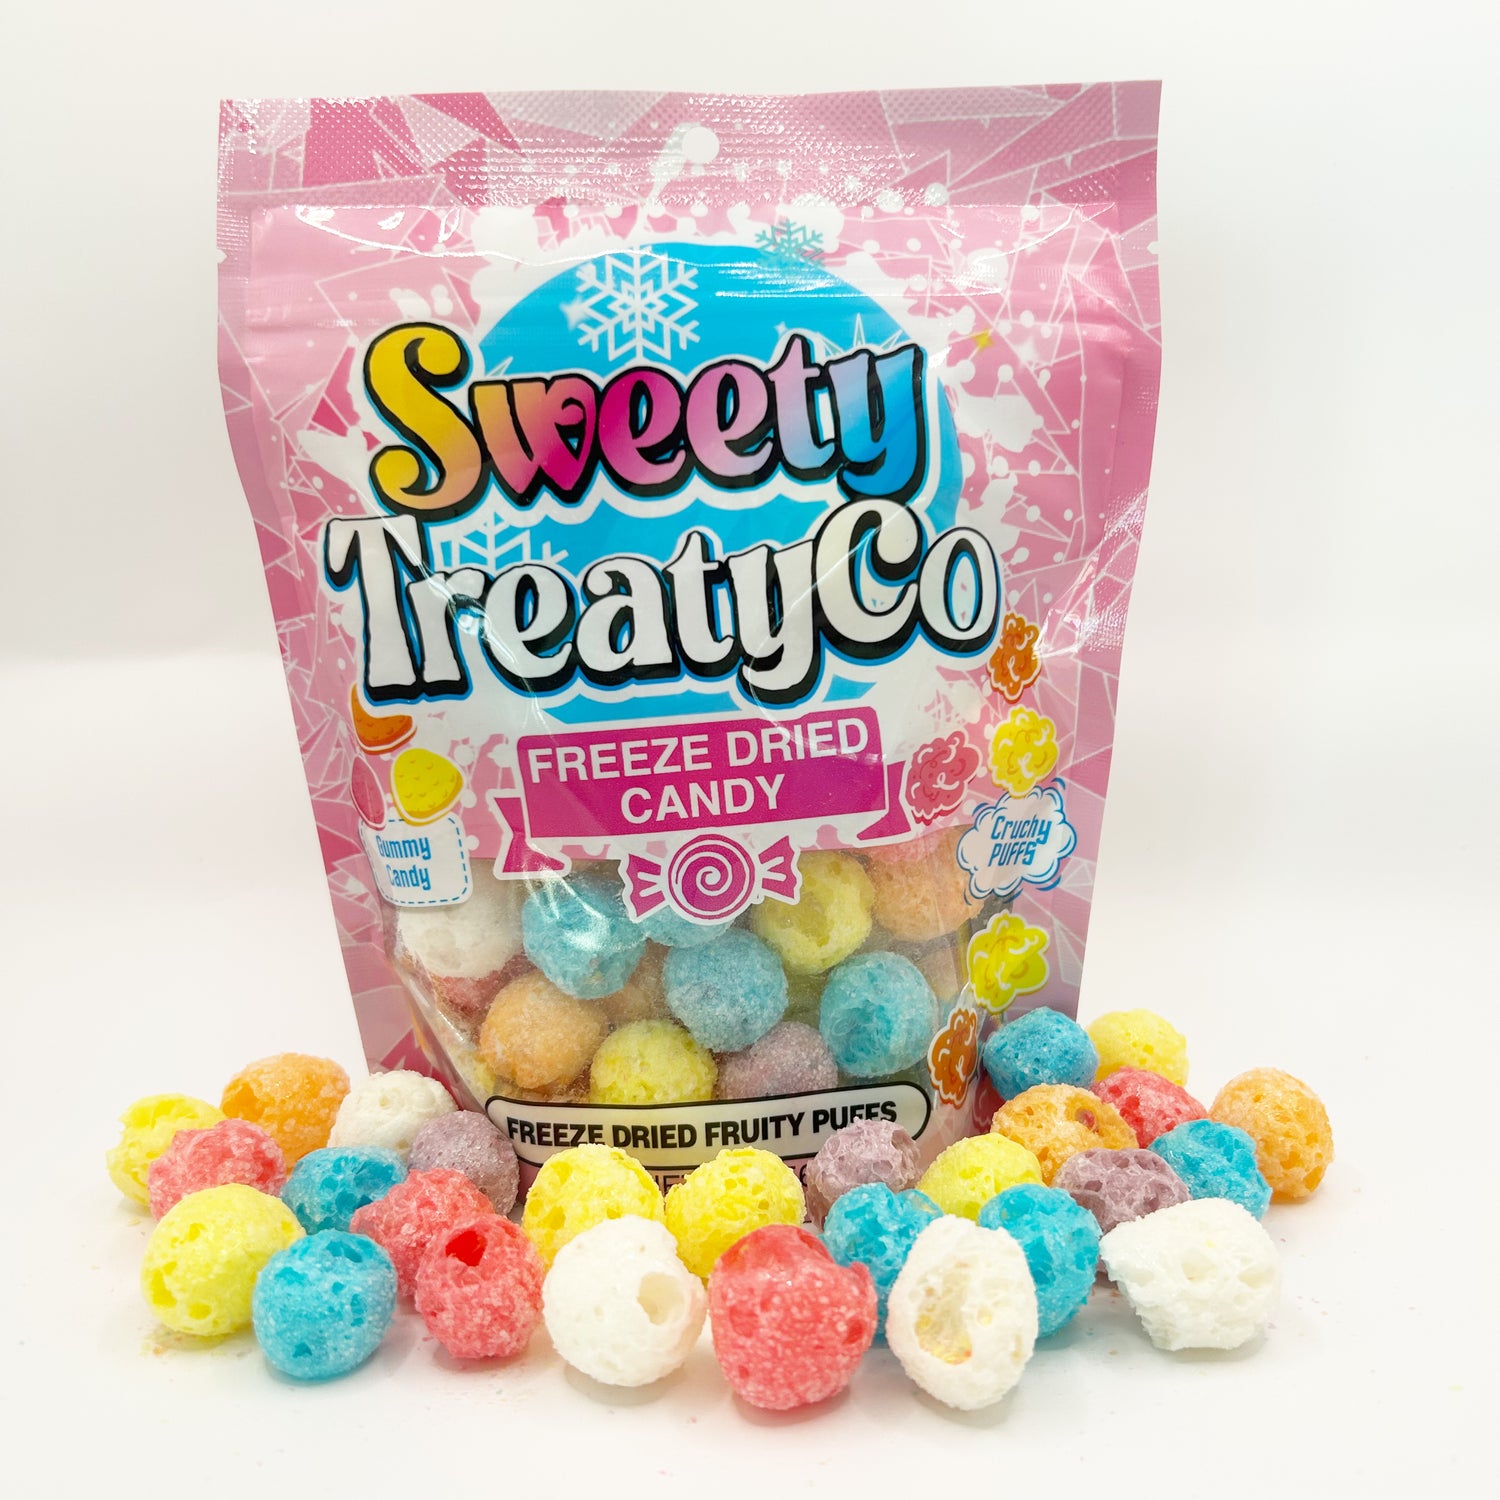 Colorful freeze-dried fruity puffs candy scattered in front of and around a vibrant pink bag.